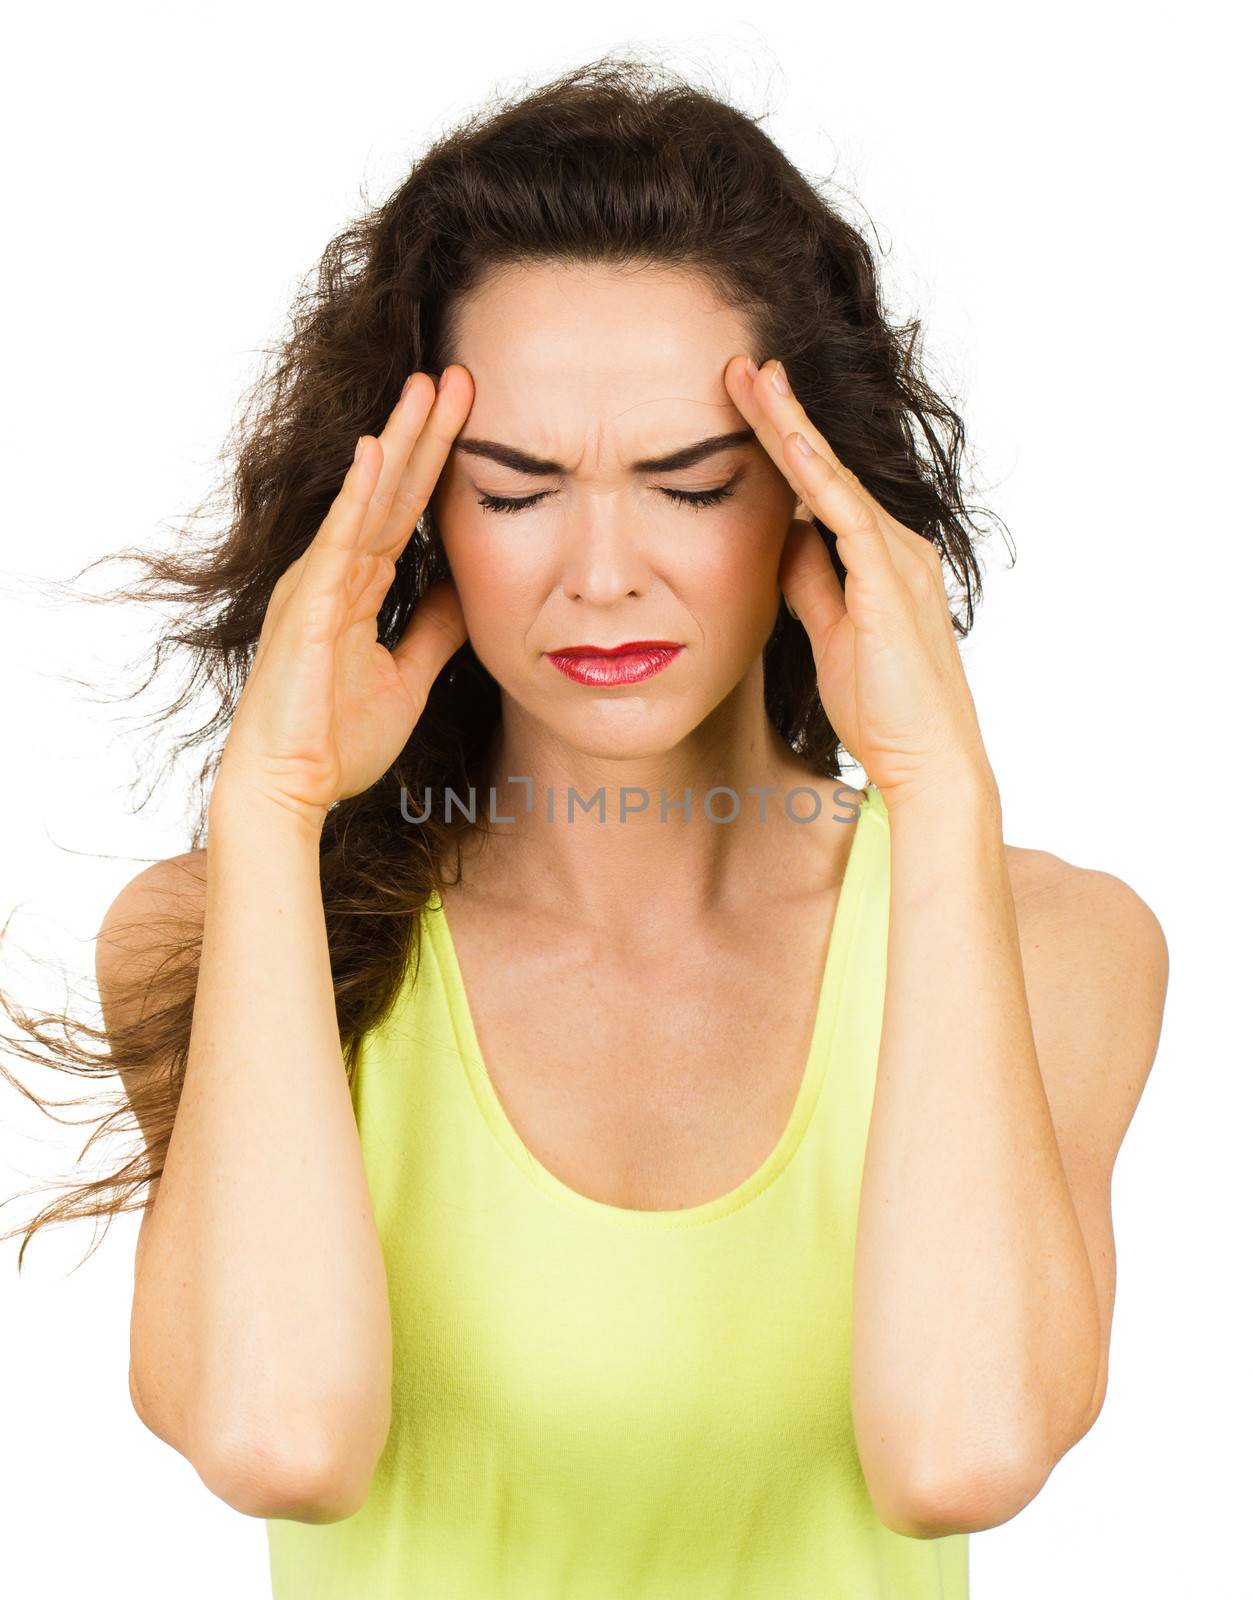 A woman with a bad headache or migraine. Isolated on white.